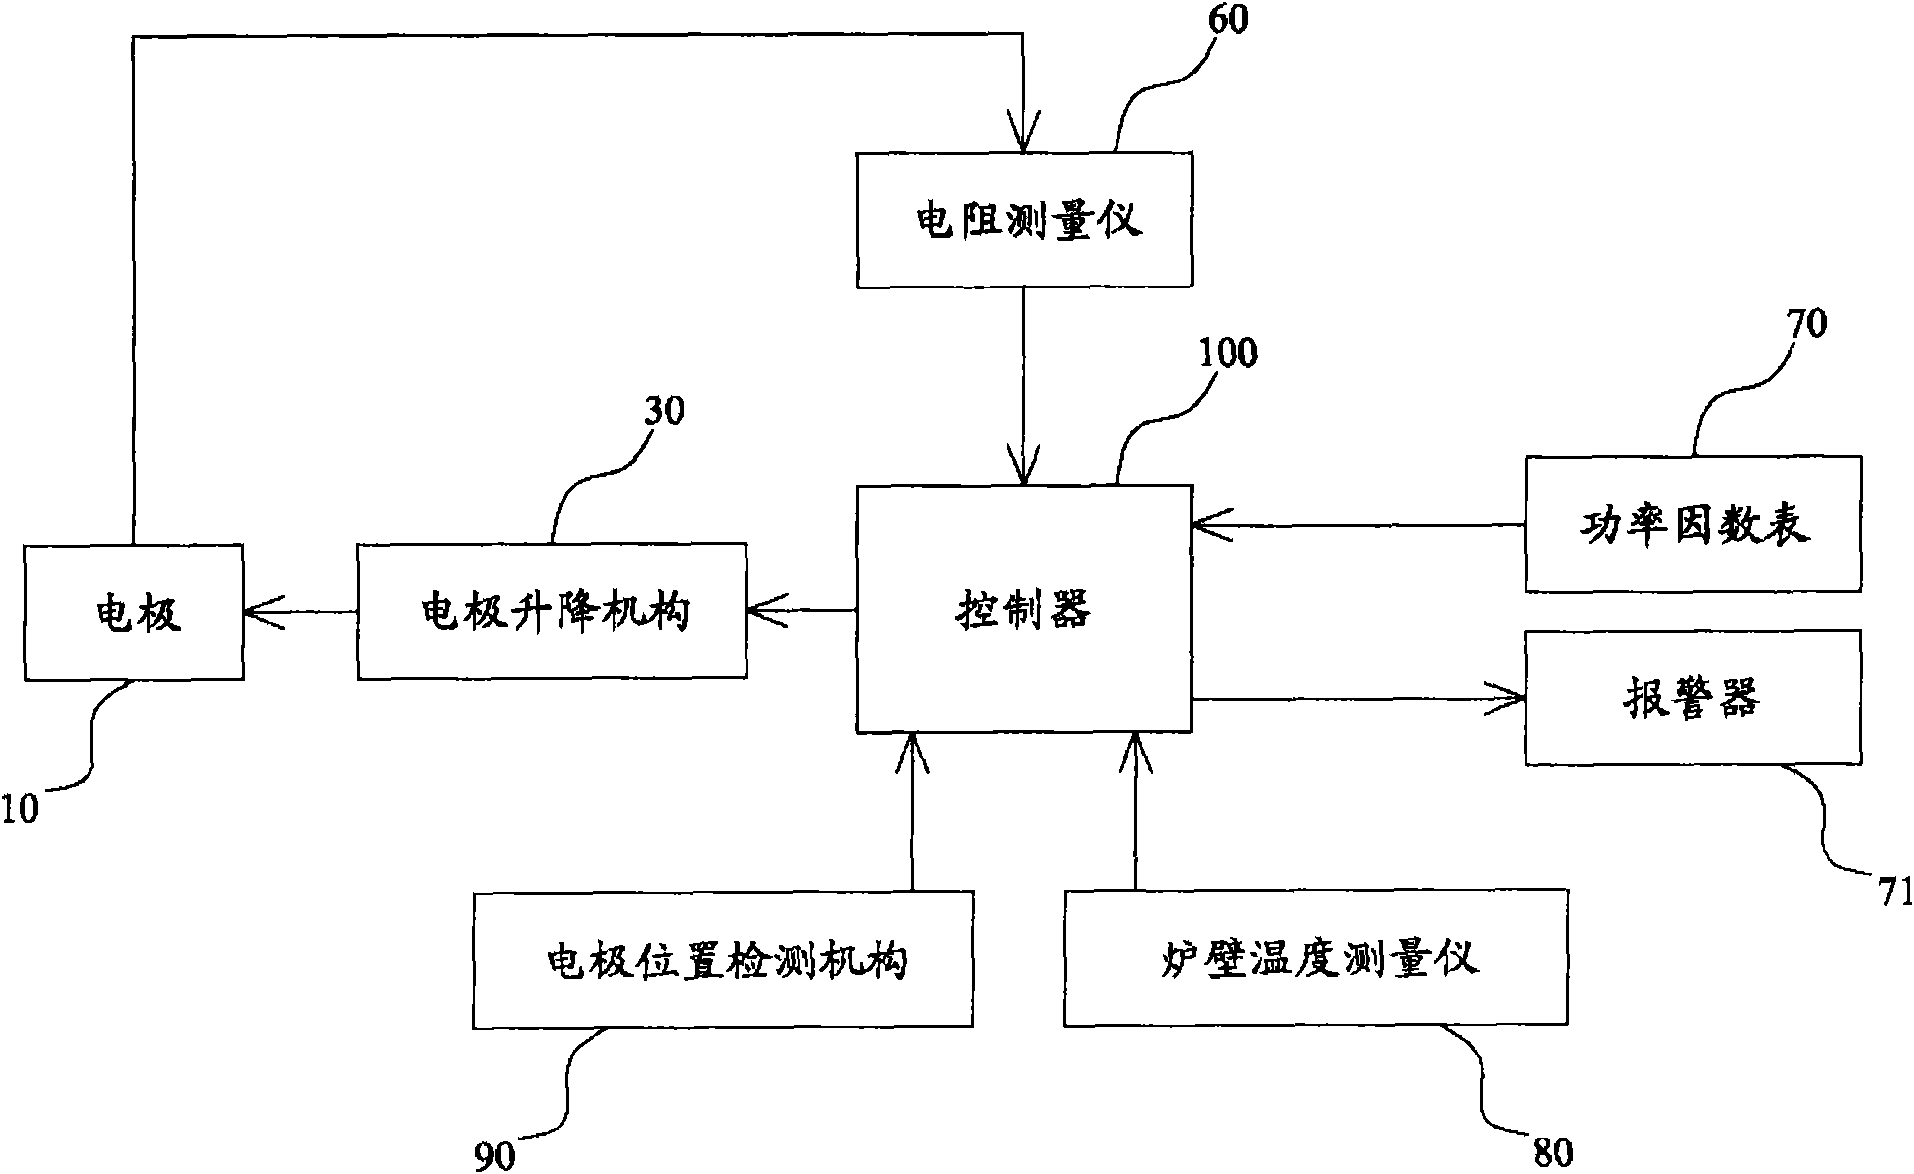 Automatic control method of electrode deep insertion of submerged electric furnace